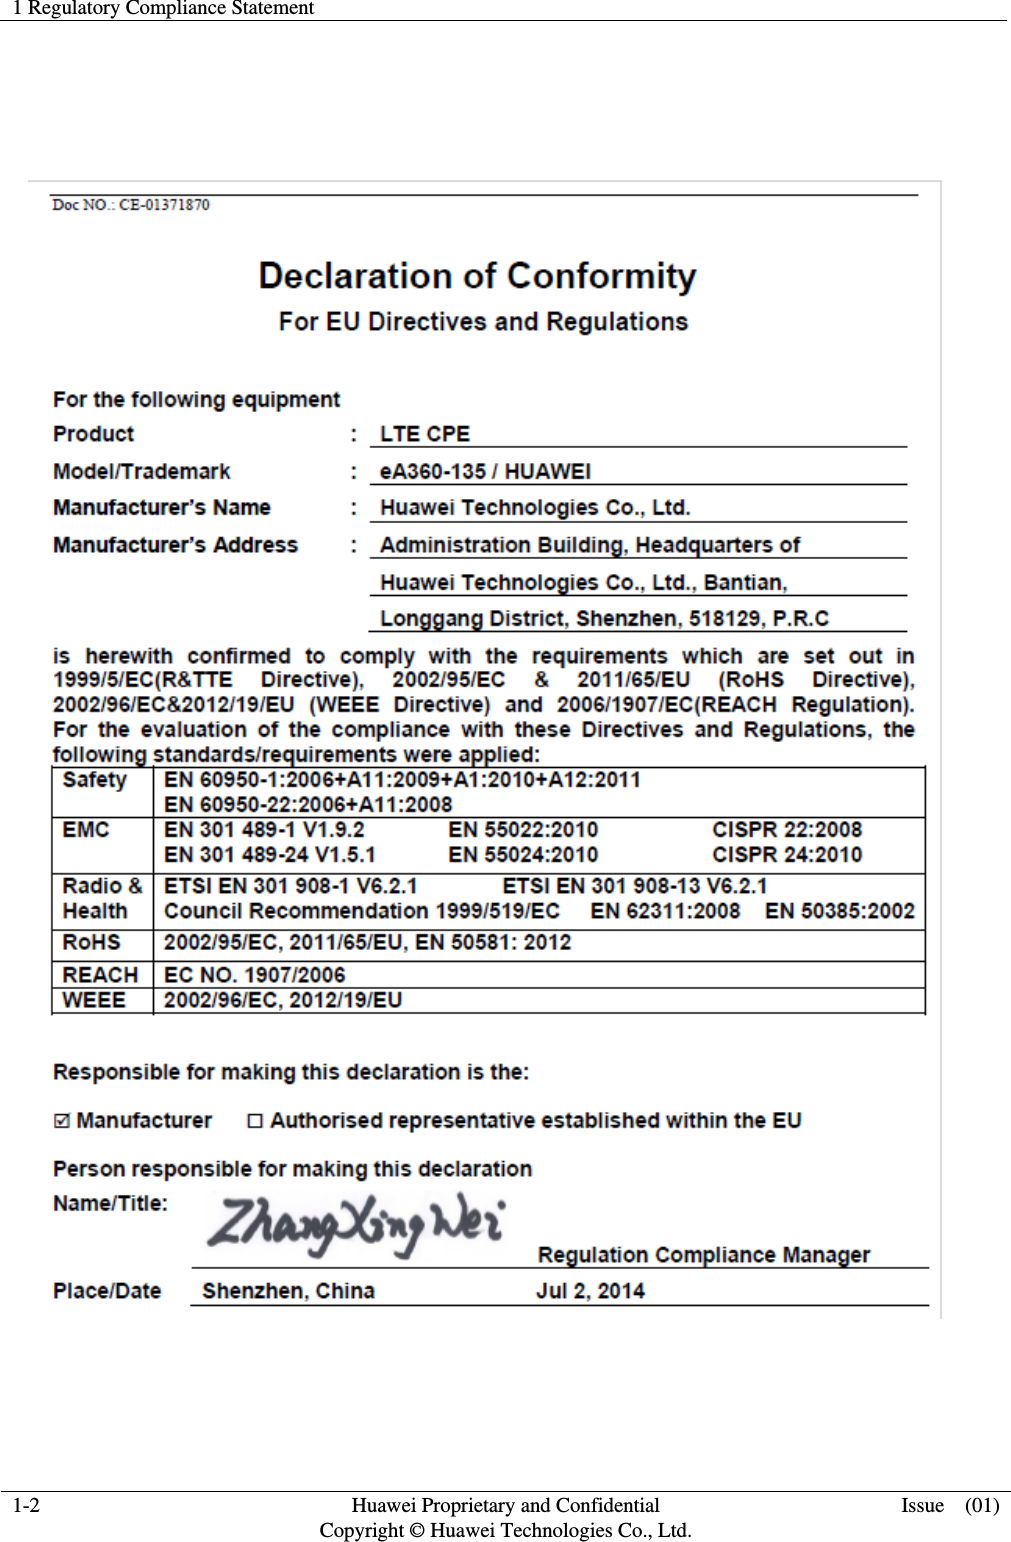 1 Regulatory Compliance Statement  1-2  Huawei Proprietary and Confidential         Copyright © Huawei Technologies Co., Ltd. Issue  (01)   